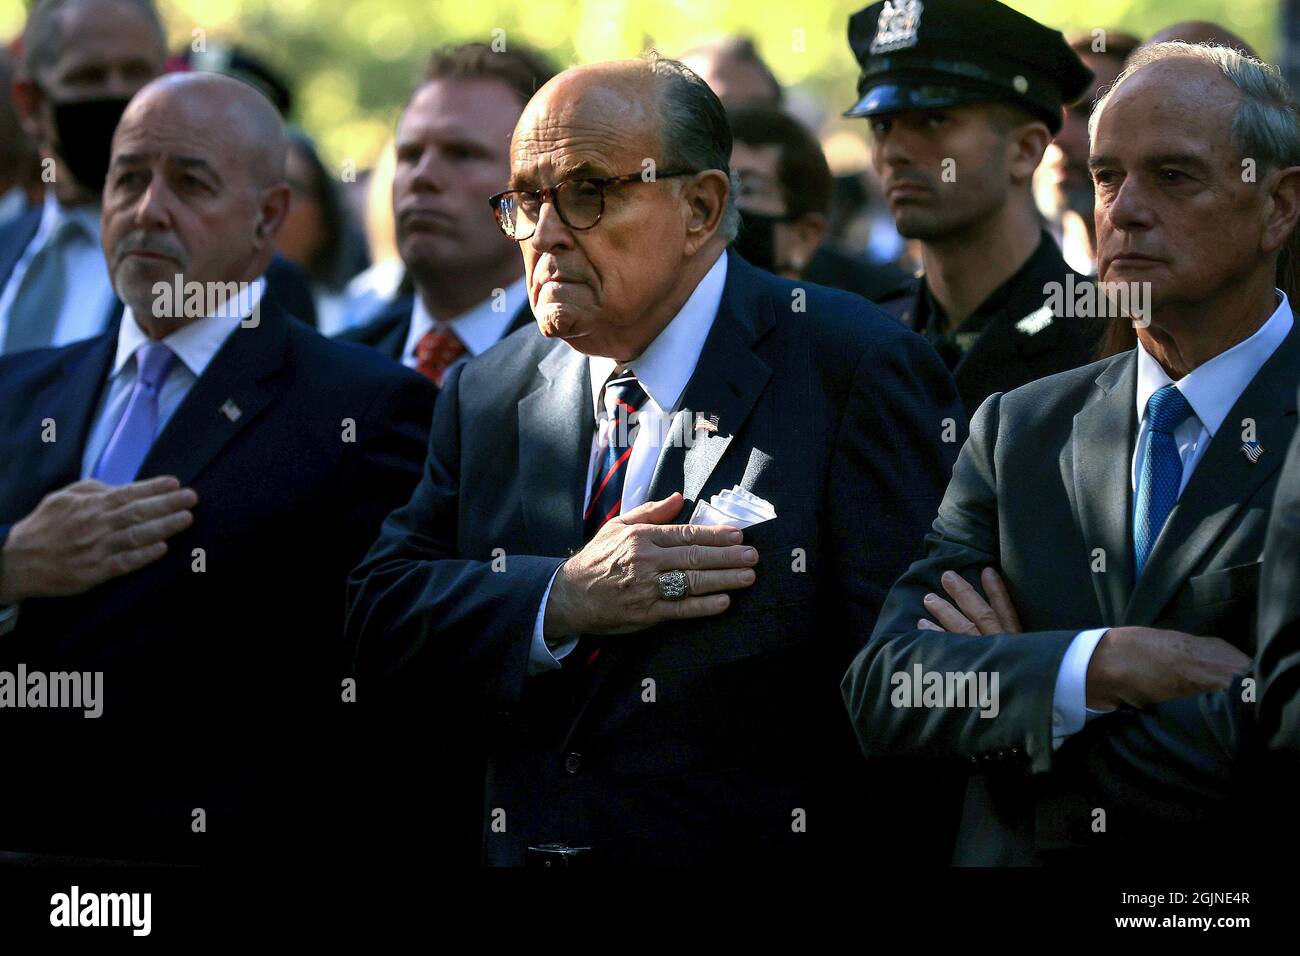 New York, USA. 11th Sep, 2021. Former New York City Mayor Rudy Giuliani (C) attends the 9/11 Commemoration Ceremony at the National 9/11 Memorial and Museum in New York City, N.Y., on September 11, 2021. Six moments of silence were held marking when each of the World Trade Center towers was struck and fell and the times corresponding to the attack on the Pentagon and the crash of United light 93 in Pennsylvania, during the 20th anniversary of the terror attacks of September 11. Pool photo by Chip Somodevilla/UPI Credit: UPI/Alamy Live News Stock Photo